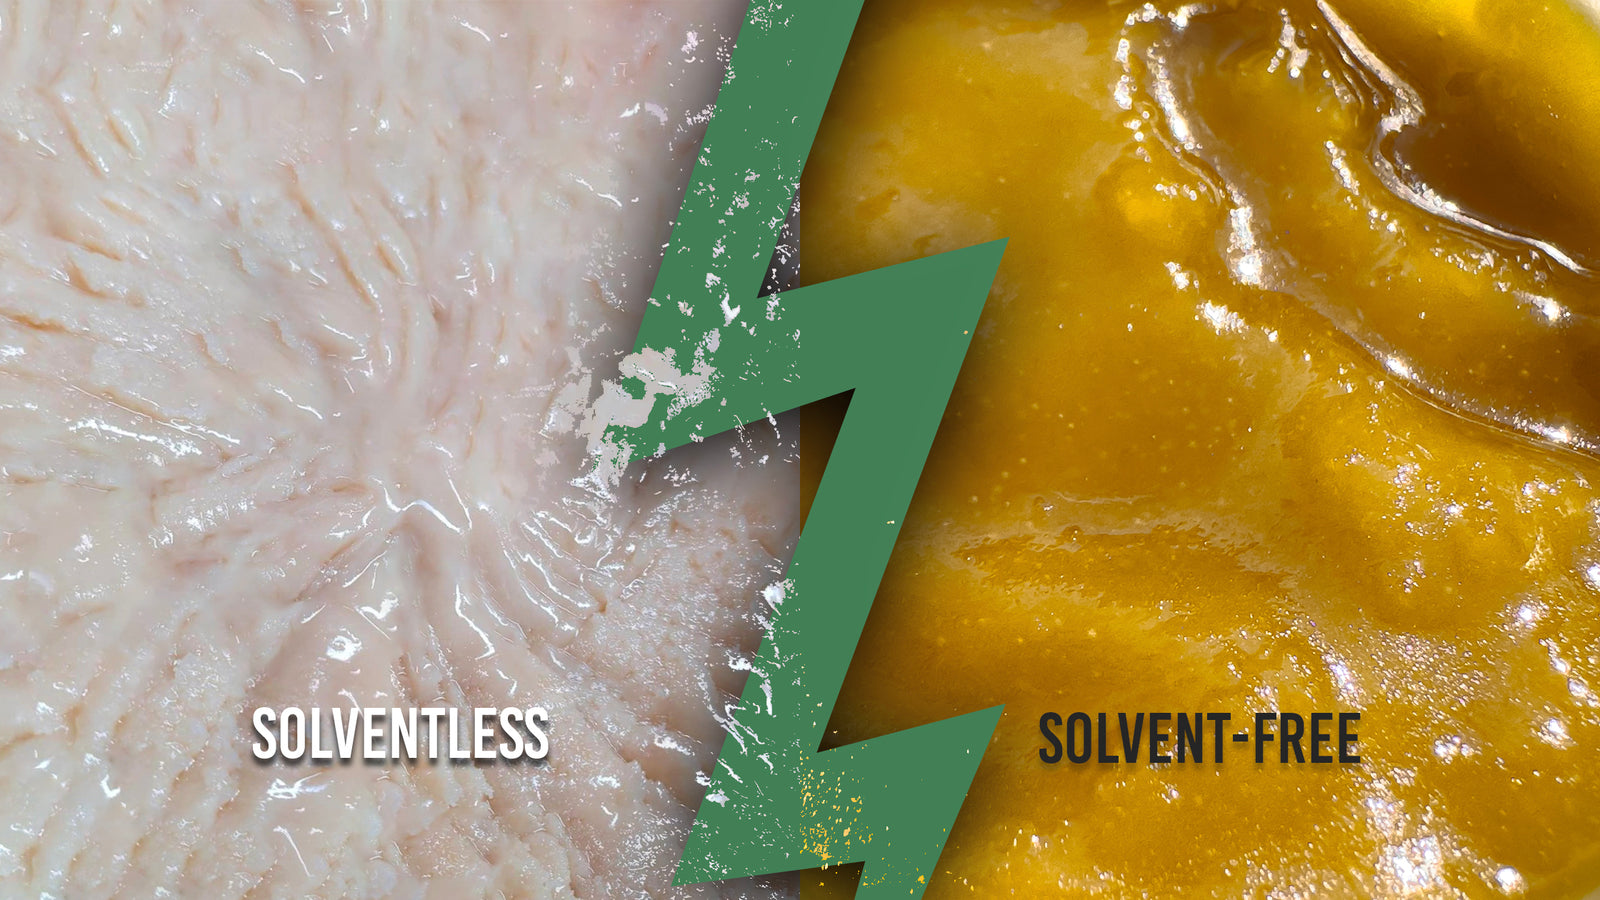 Solventless Central |  The Difference Between Solventless CBD and Everything Else